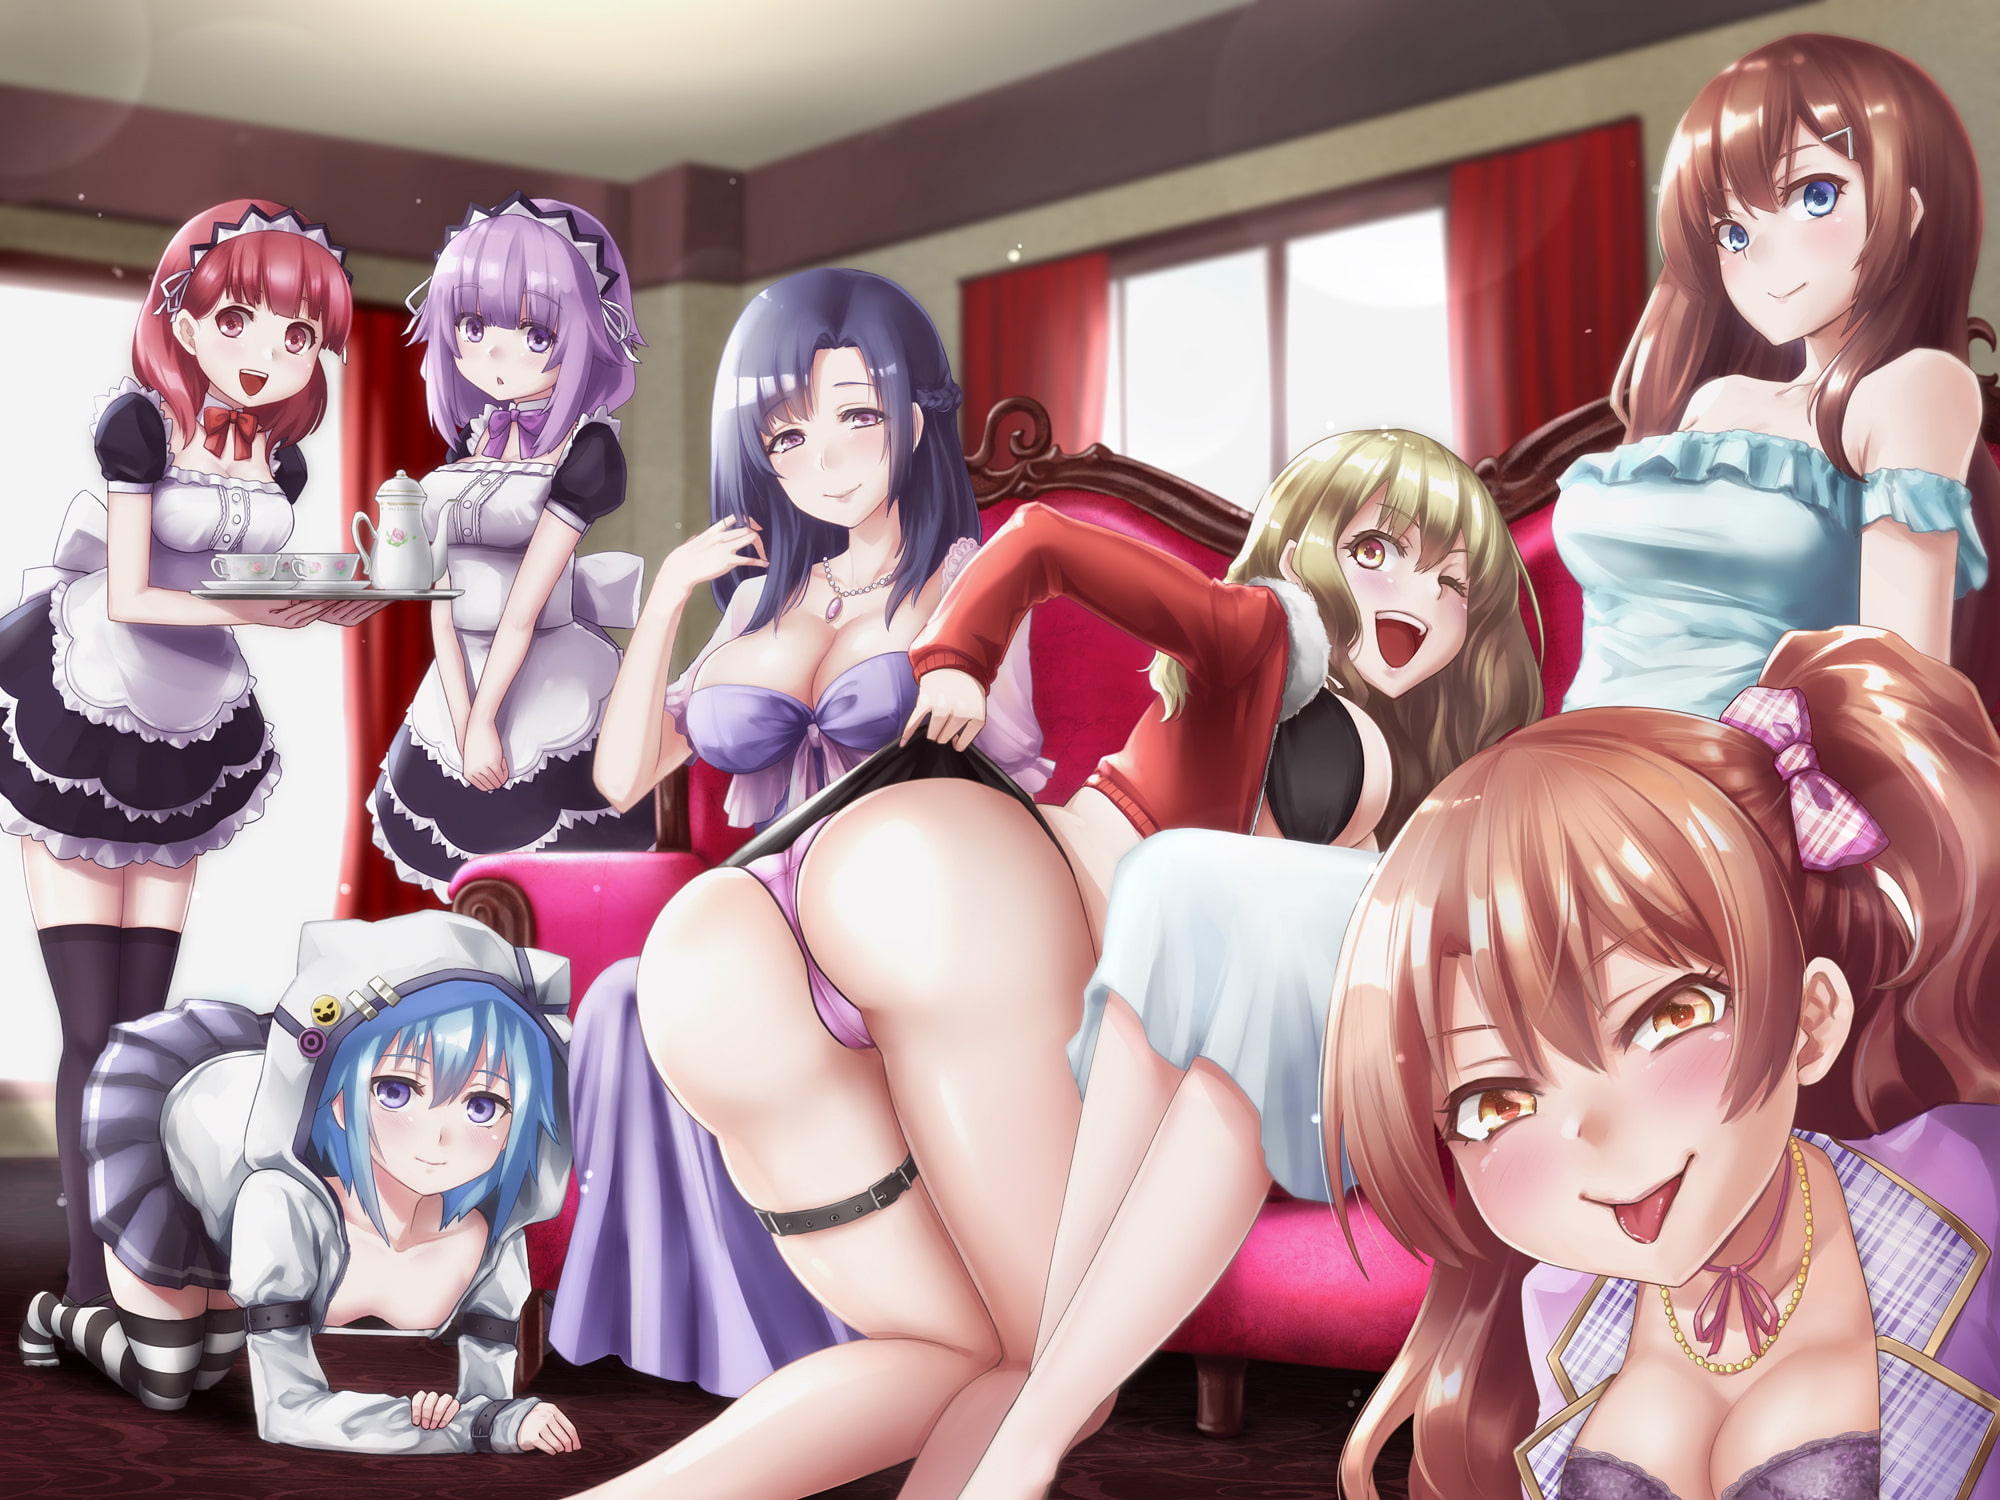 Welcome to the Mansion of Pleasure ~Twin Maid's Ear Licking~ [7 Sequential Titles]